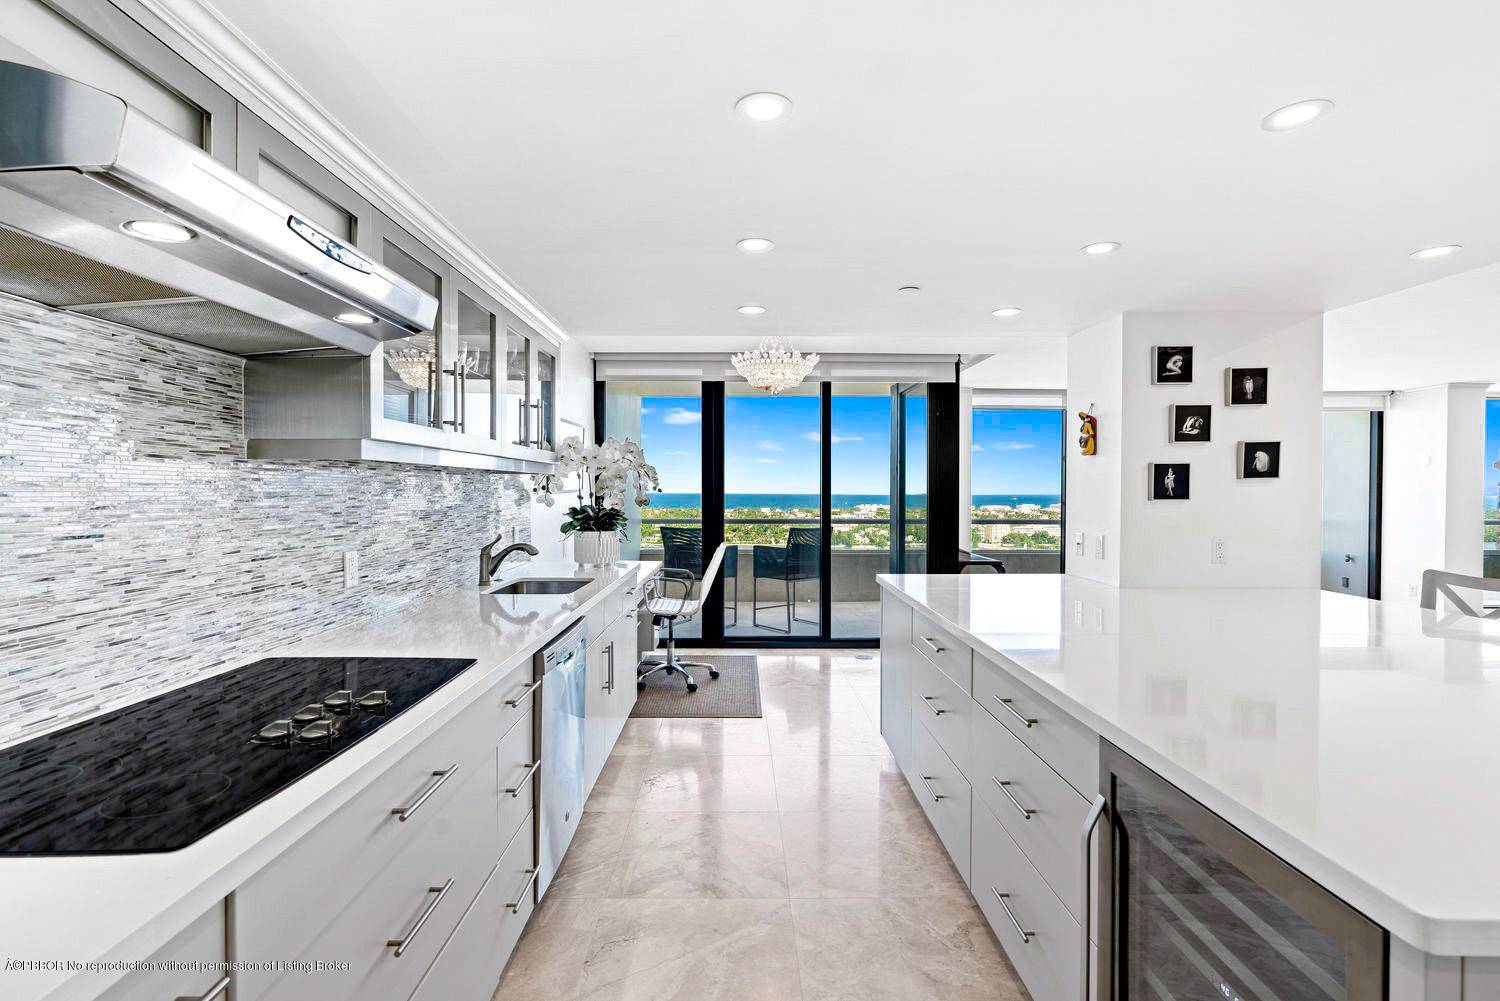 Impressive 4, 000 SF residence and spectacular views of the Intracoastal, Ocean, and Palm Beach.